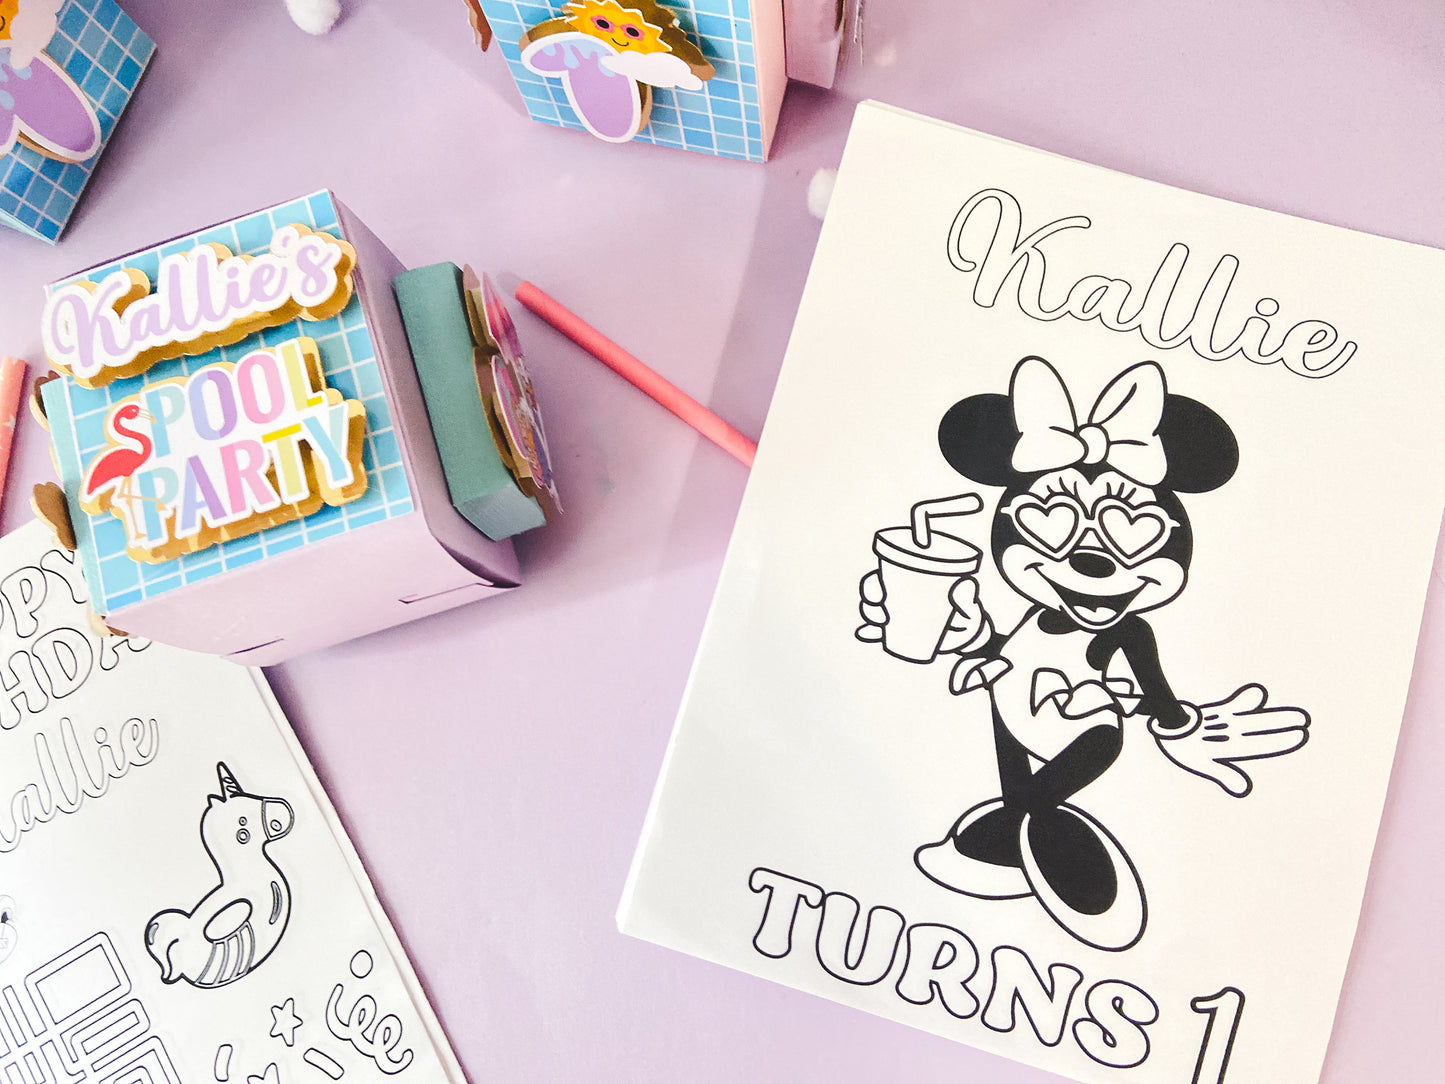 Pool 12 Coloring activity favors | kids party favors | personalized party favors | Minnie pool party | Minnie Mouse customizable favors